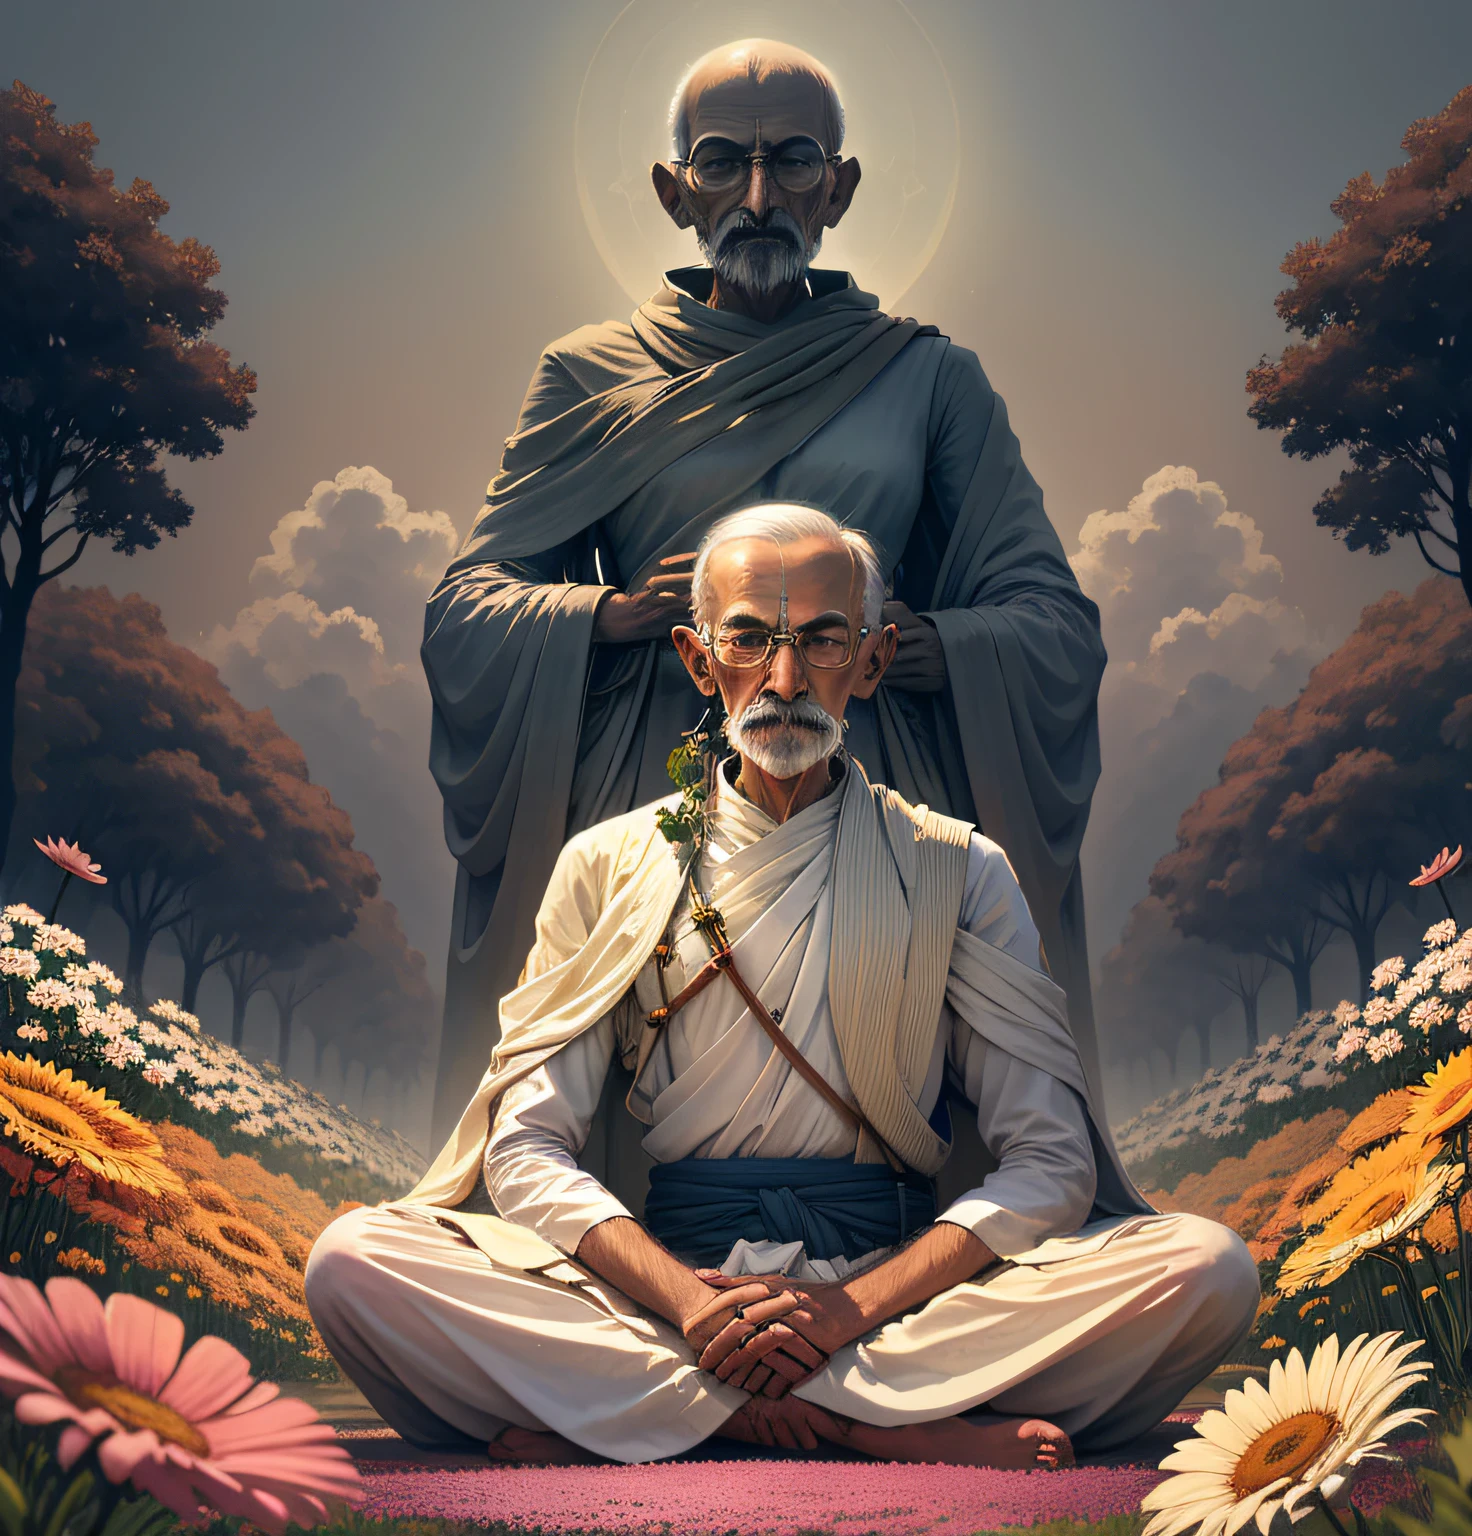 A peaceful man with a powerful message, Mahatma Gandhi stands tall in a field of vibrant flowers, his eyes closed in meditation as he contemplates the path to true .